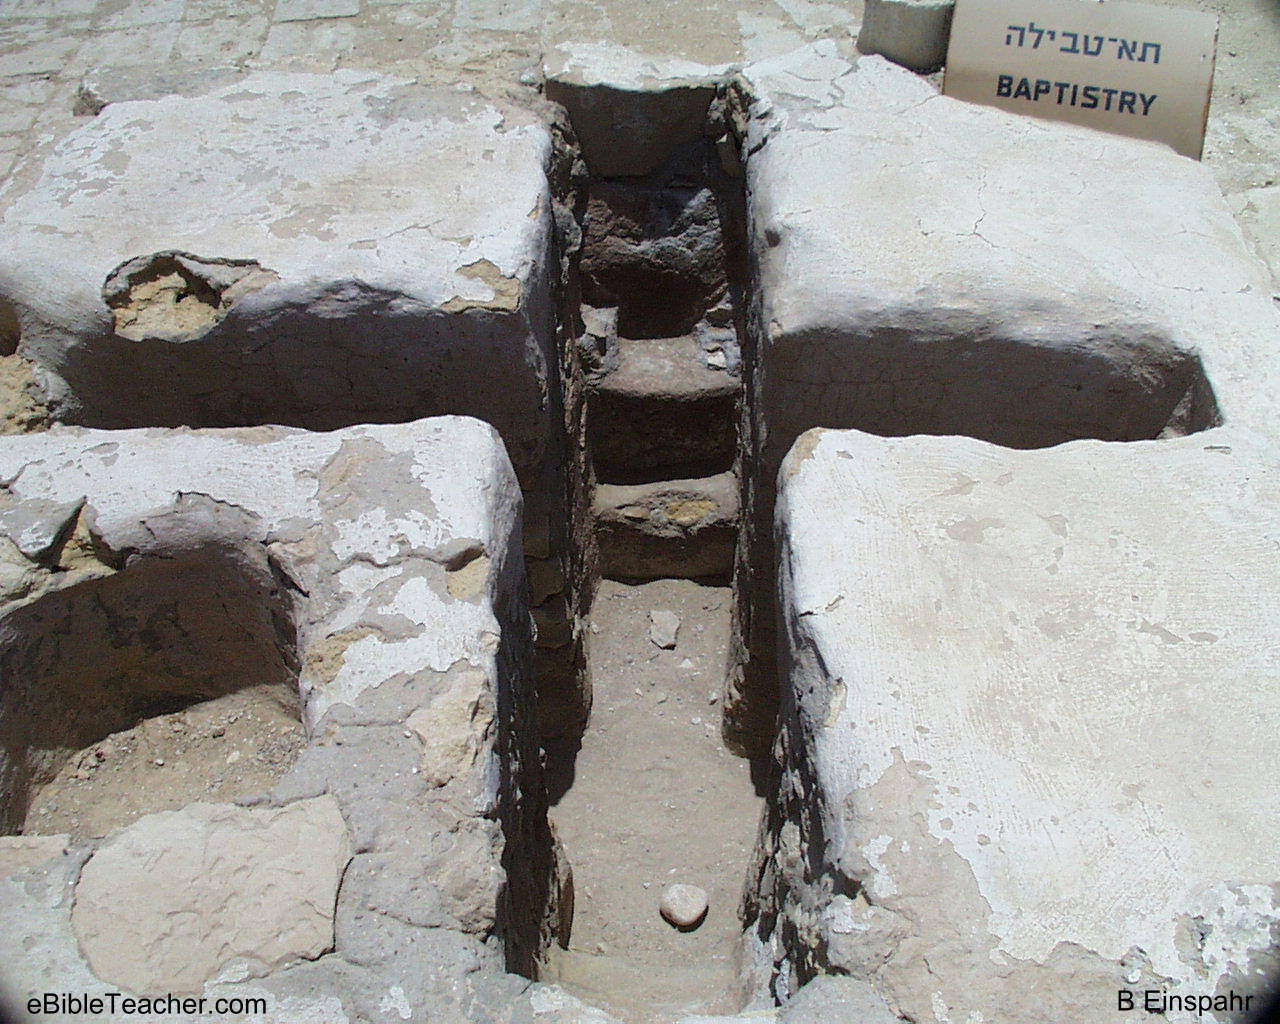 The Baptistery Avdat in Negev, AD250-600, is cross-shaped